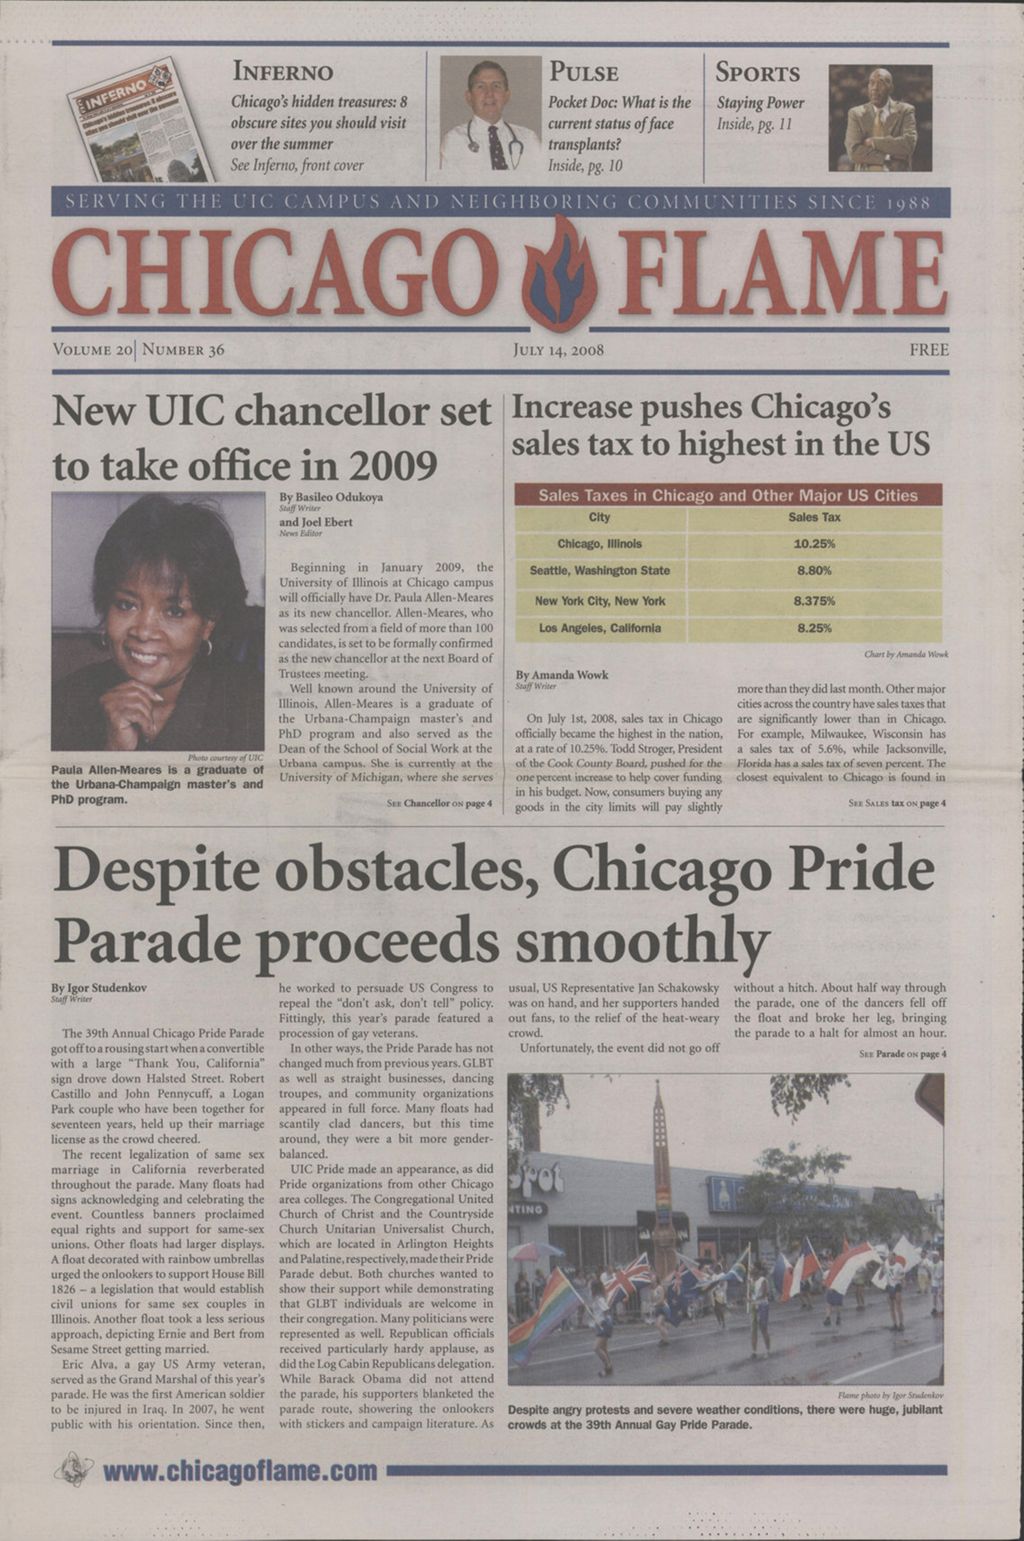 Miniature of Chicago Flame (July 14, 2008)